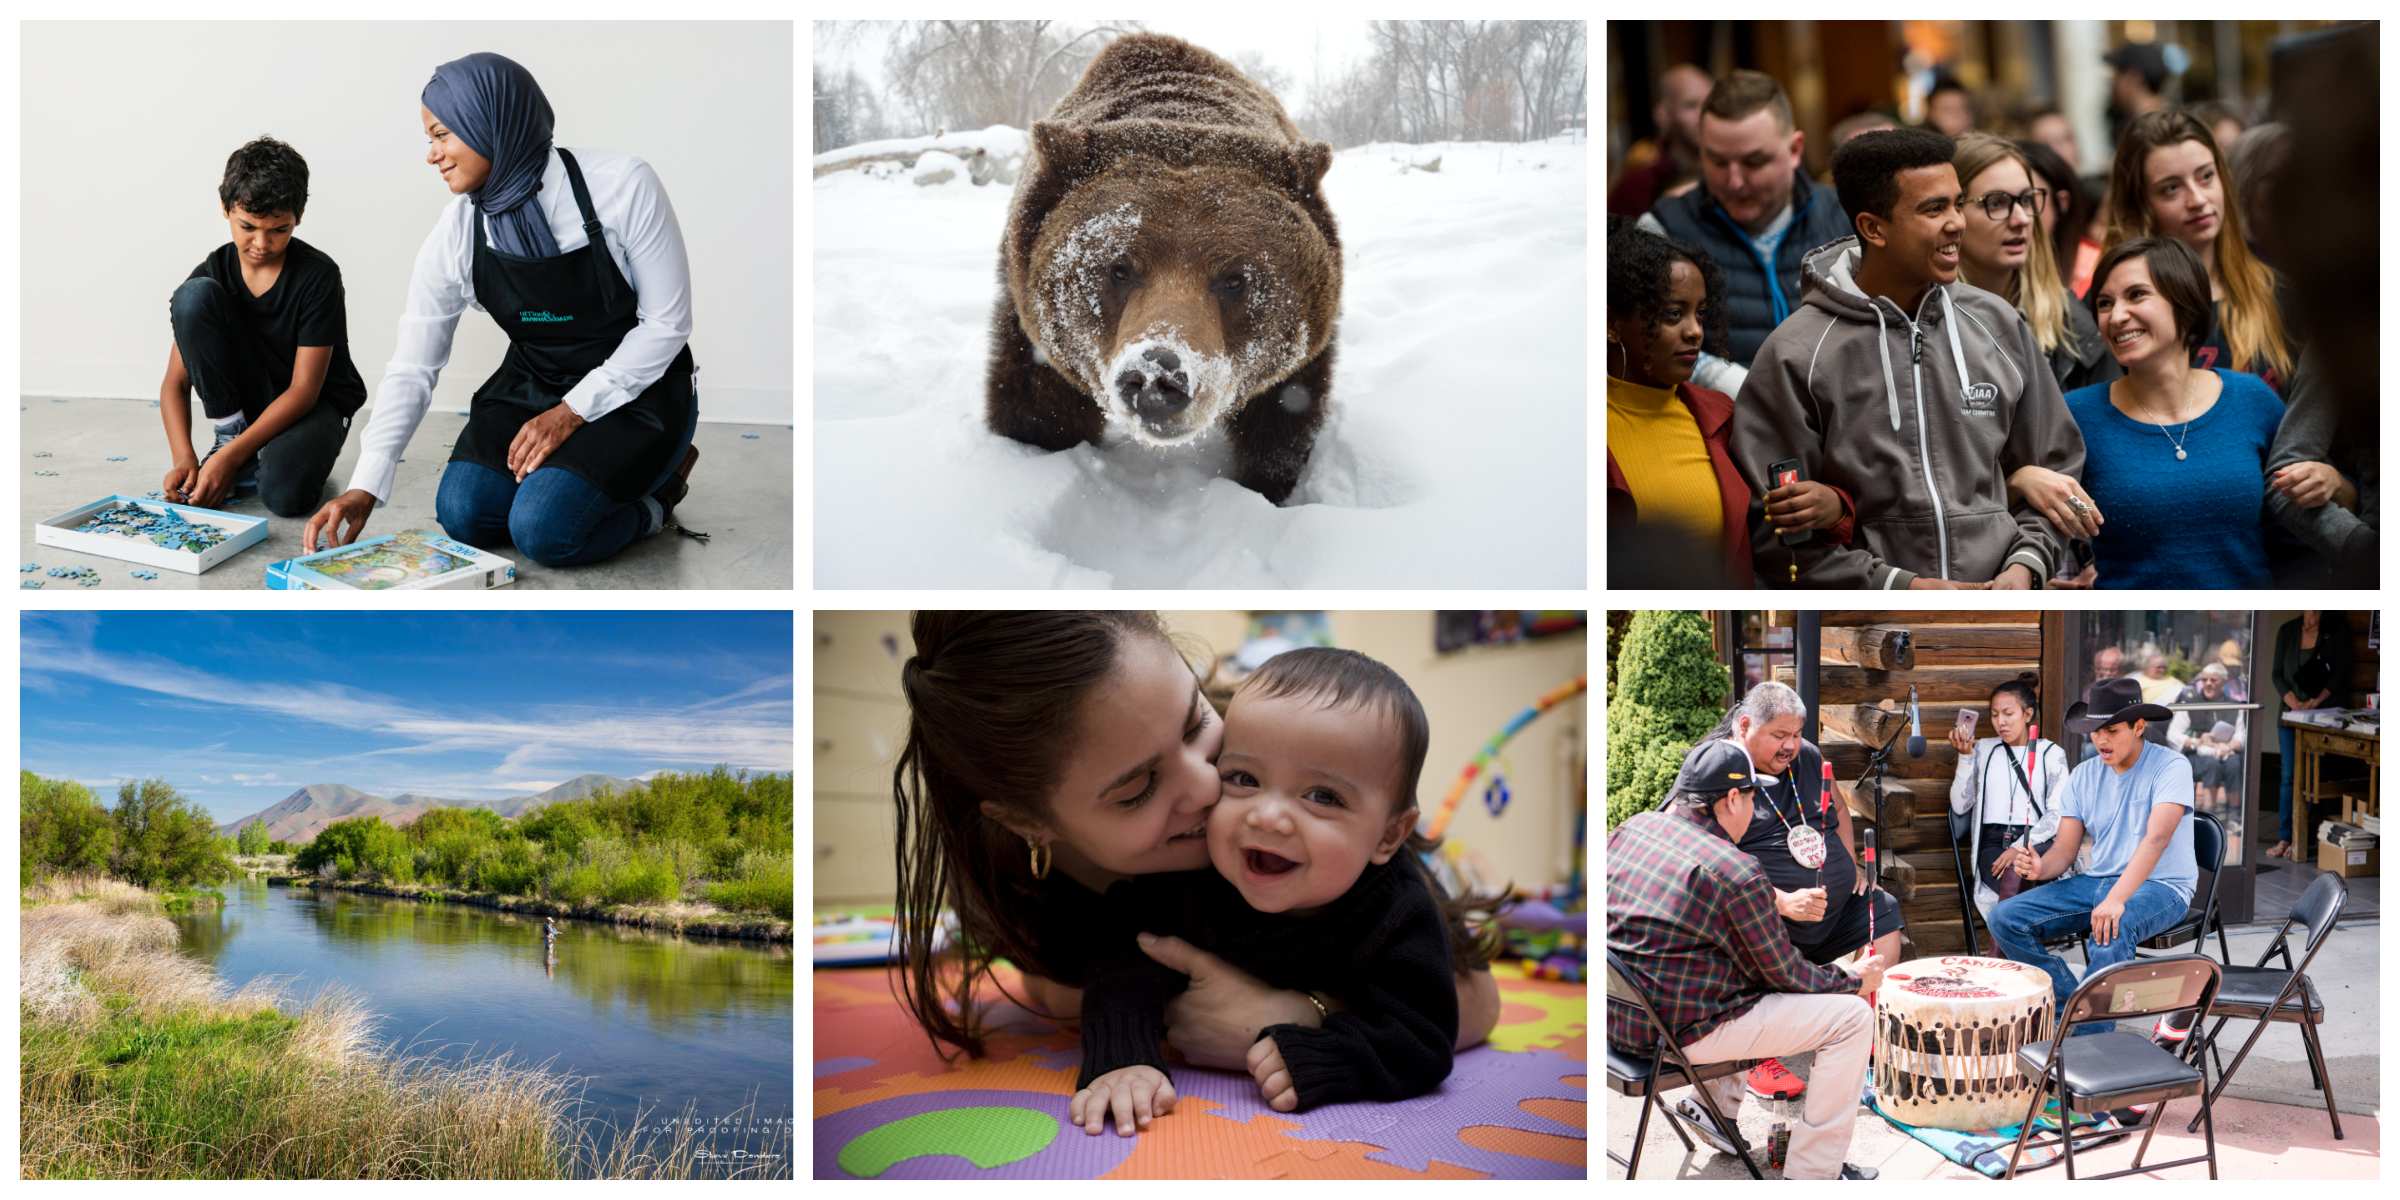 Image 1: a woman and a young boy do a puzzle together on the floor. Image 2: a tree-lined body of water with mountains in the background. Image 3: a brown bear in the snow looks at the camera. Image 4: a woman hugs a young boy on a play mat. Image 5: a crowd of people with linked arms smile. Image 6: four adults sit around a drum. 